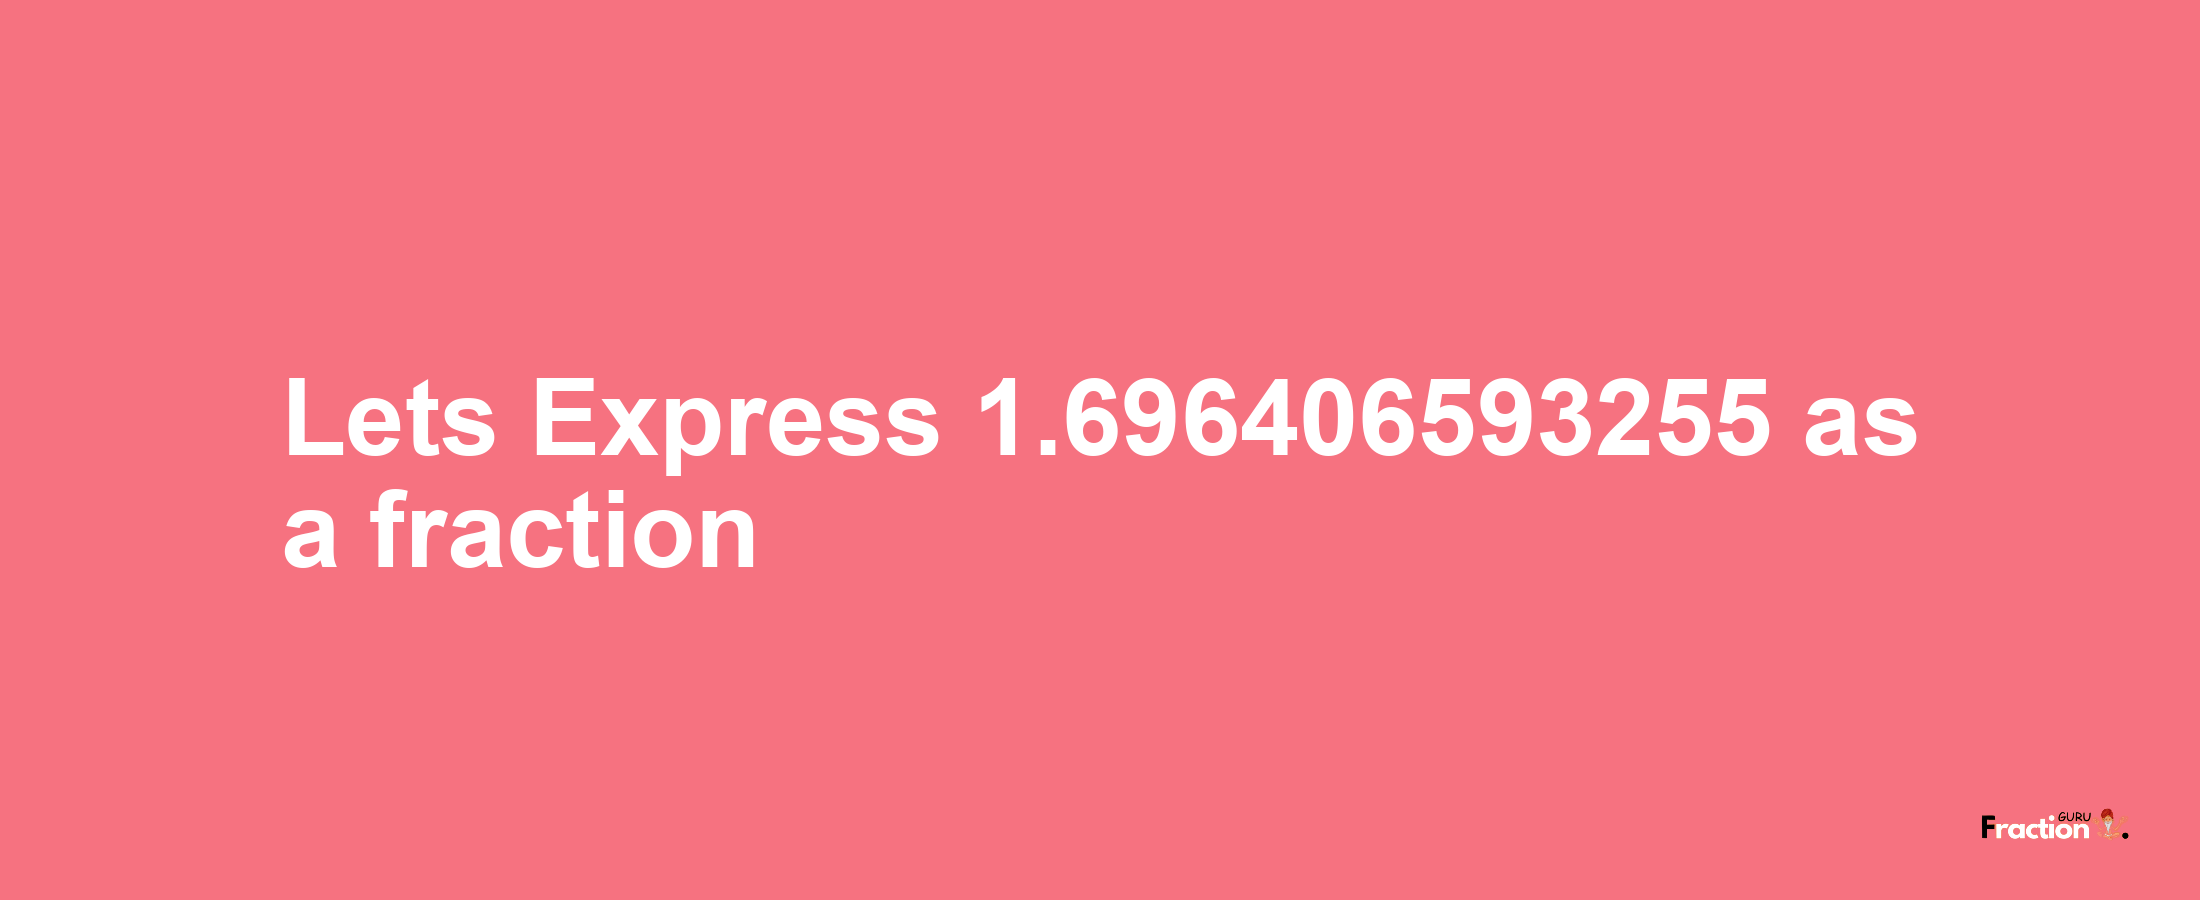 Lets Express 1.696406593255 as afraction